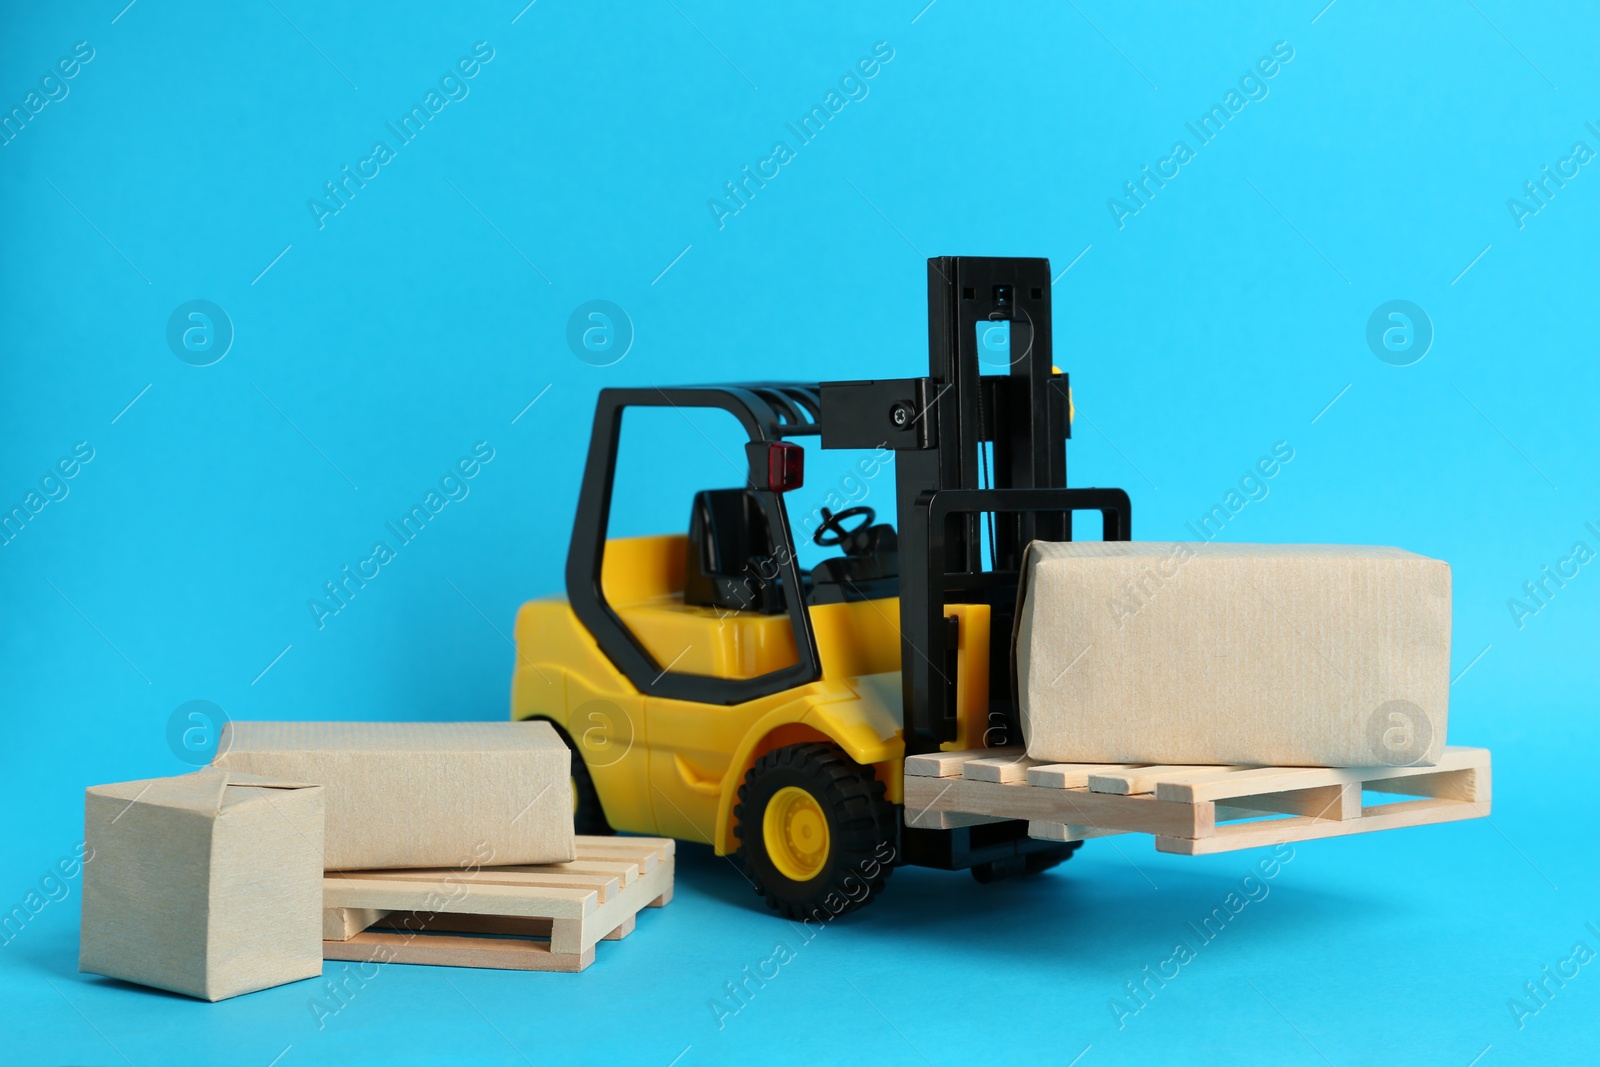 Photo of Toy forklift, wooden pallets and boxes on light blue background